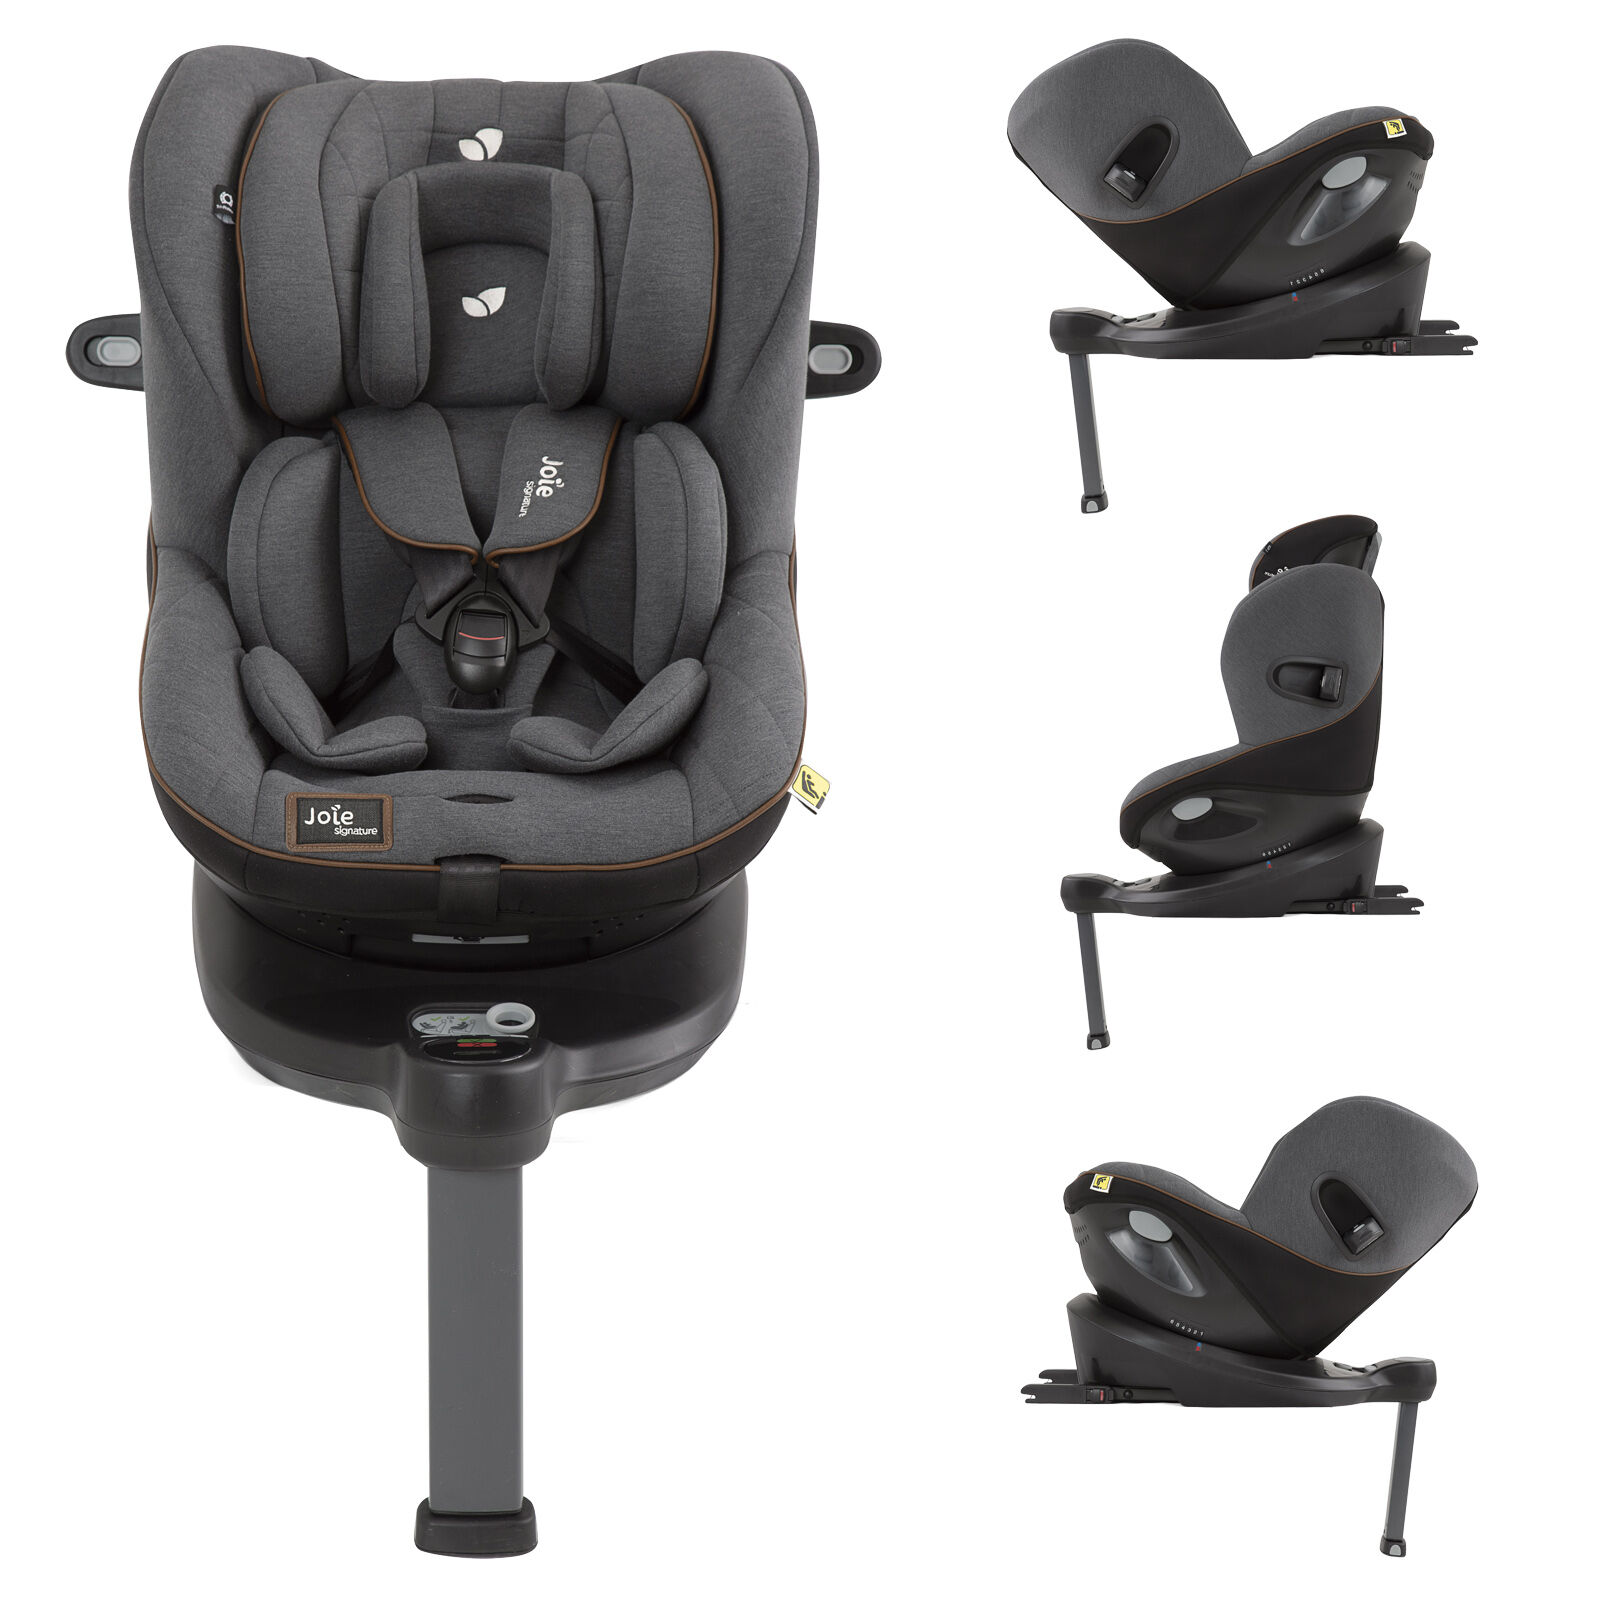 Joie Limited Edition i-Spin 360 iSize ISOFIX Group 0+/1 Car Seat - Signature Noir